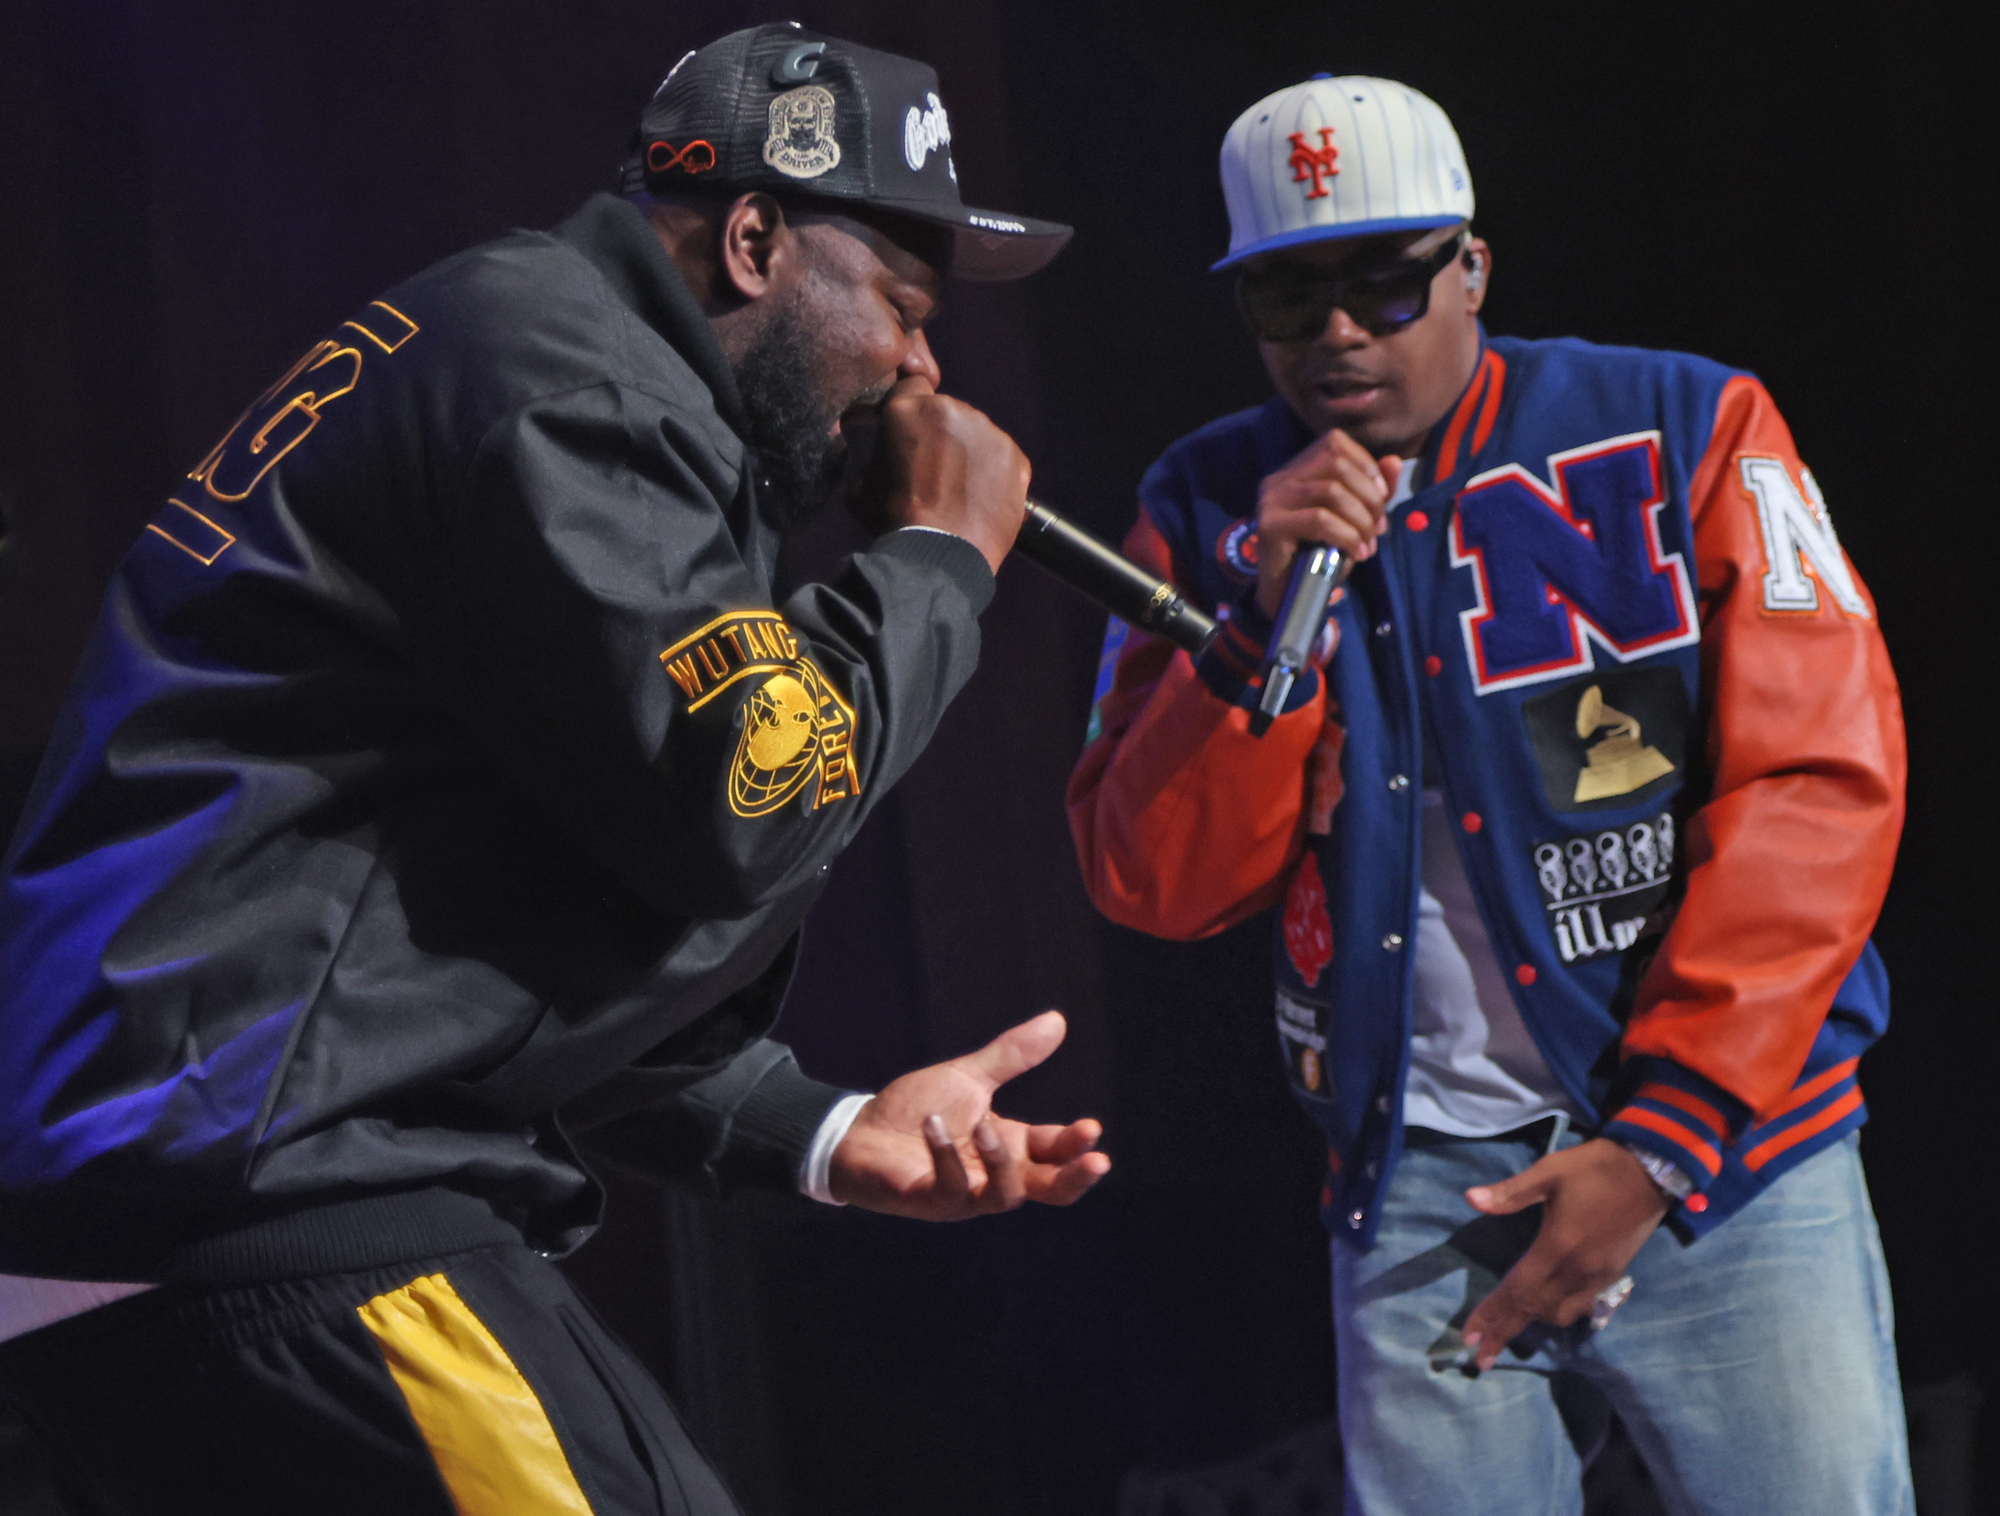 WuTang Clan and Nas 2023 tour Dates, NYC shows and how to buy tickets